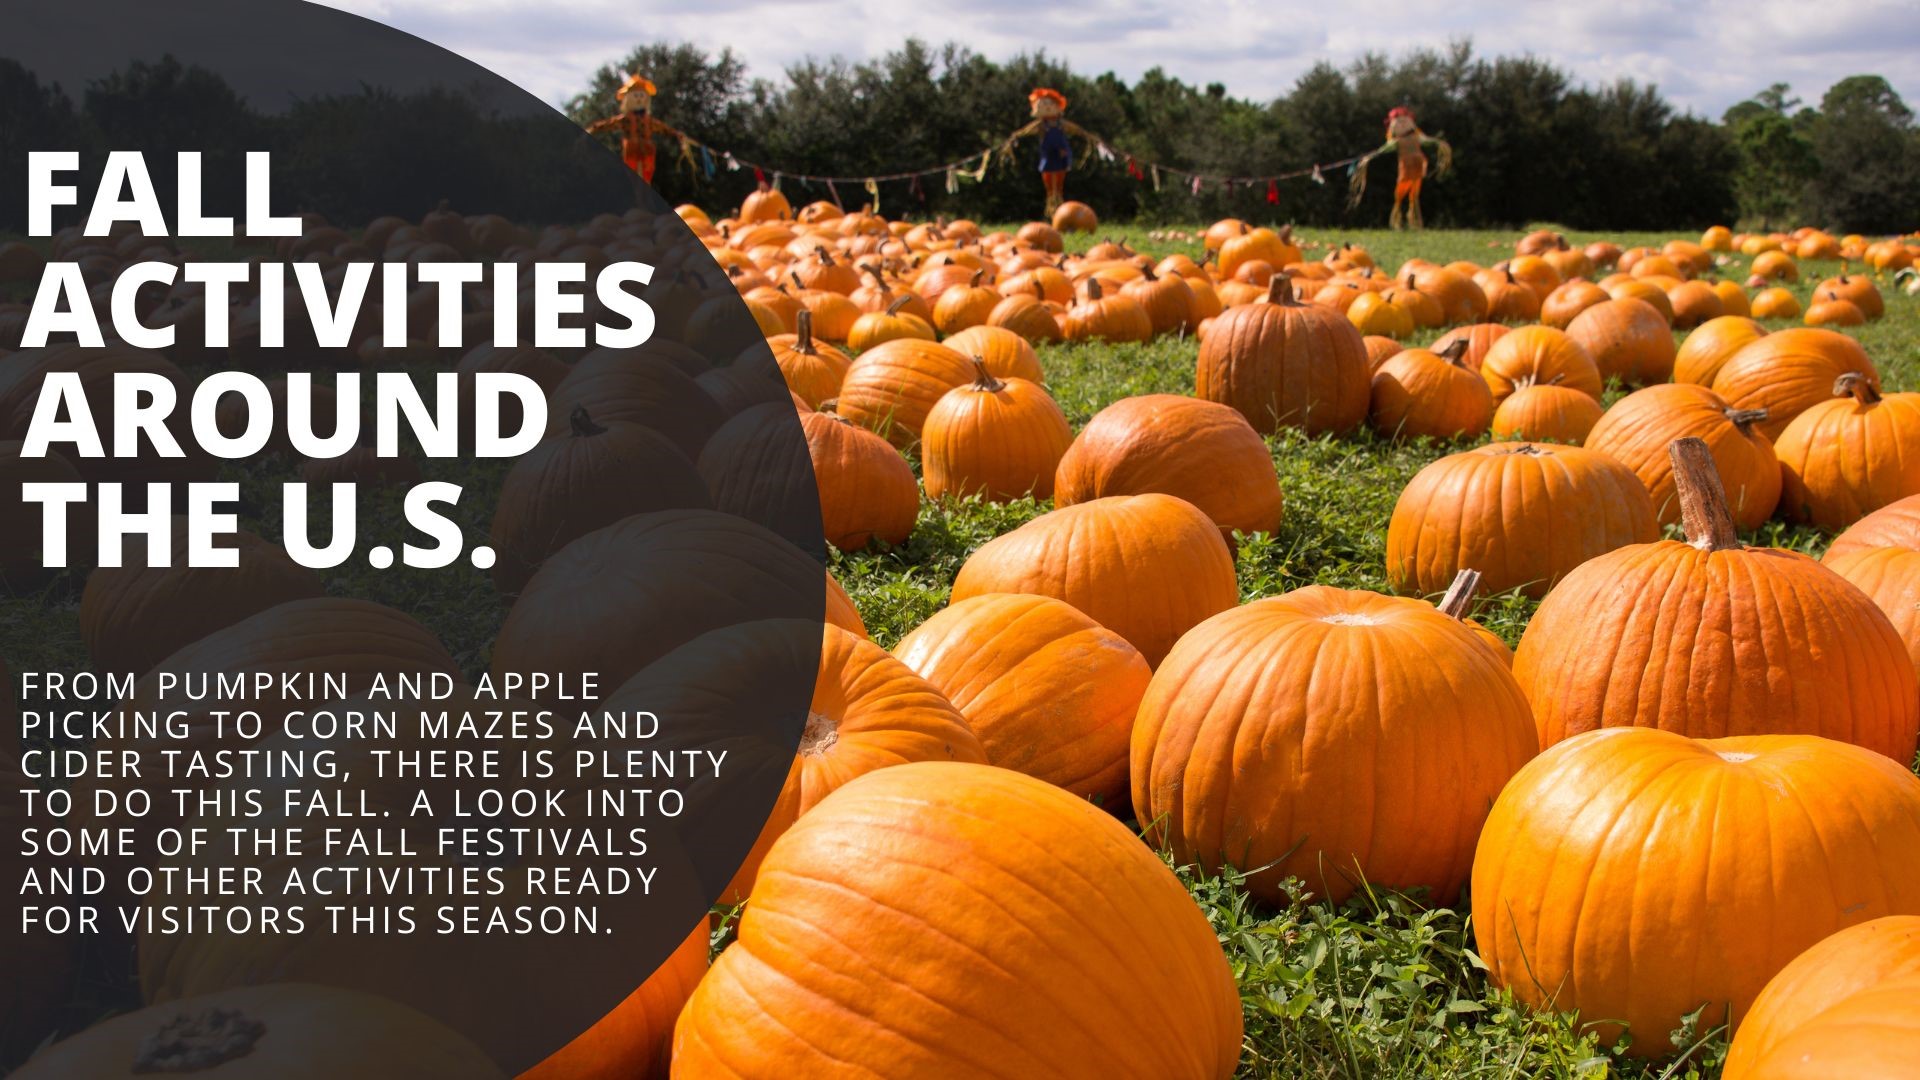 From pumpkin and apple picking to corn mazes and cider tasting, there is plenty to do this fall. A look into some of the fall festivals happening across the U.S.